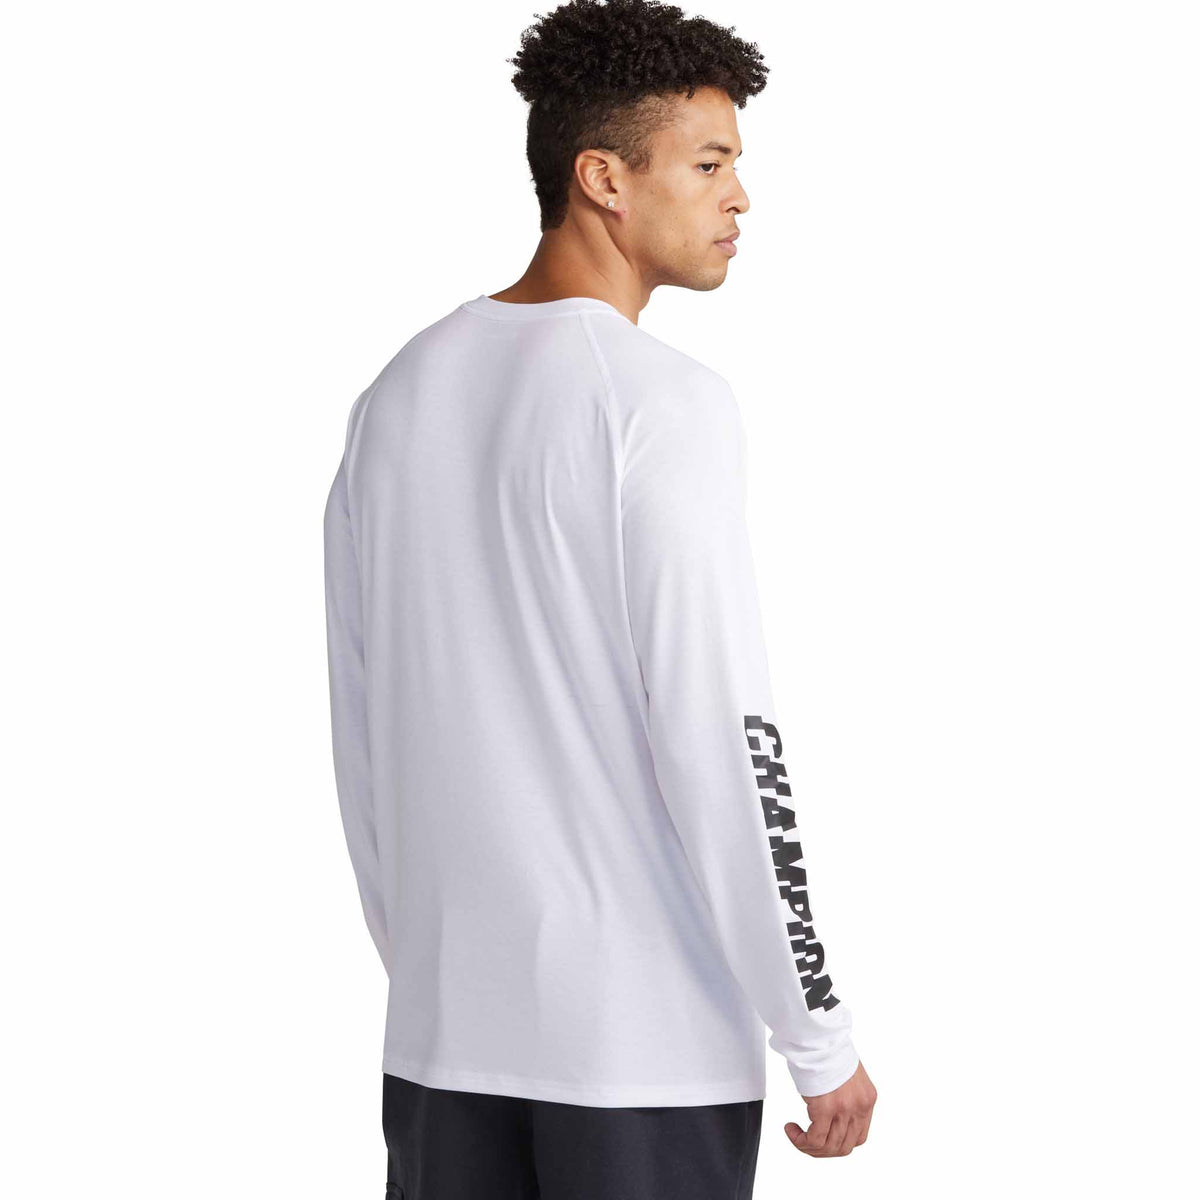 Champion Long Sleeve Graphic City Sport Tee chandail à manches longues - Blanc - Dos